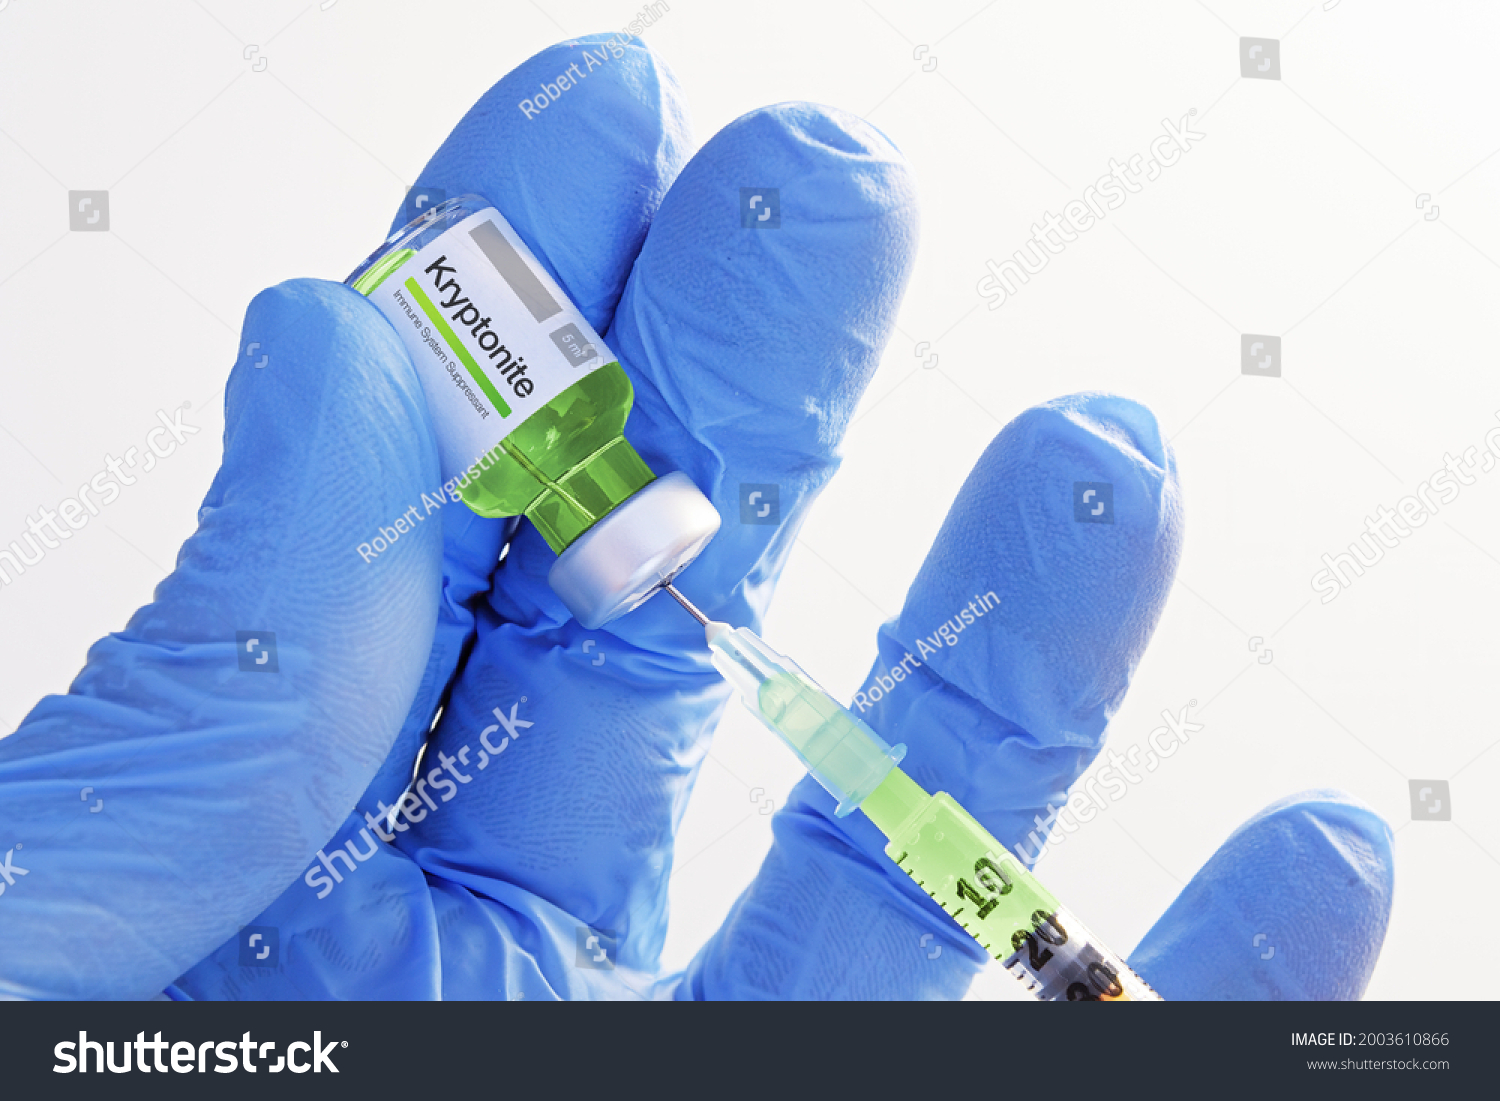 Close-up of hand in gloves holding a vial with kryptonite and extracting fluid to syringe for injection. Healthcare, medicine, pharmacy and vaccination concepts #2003610866